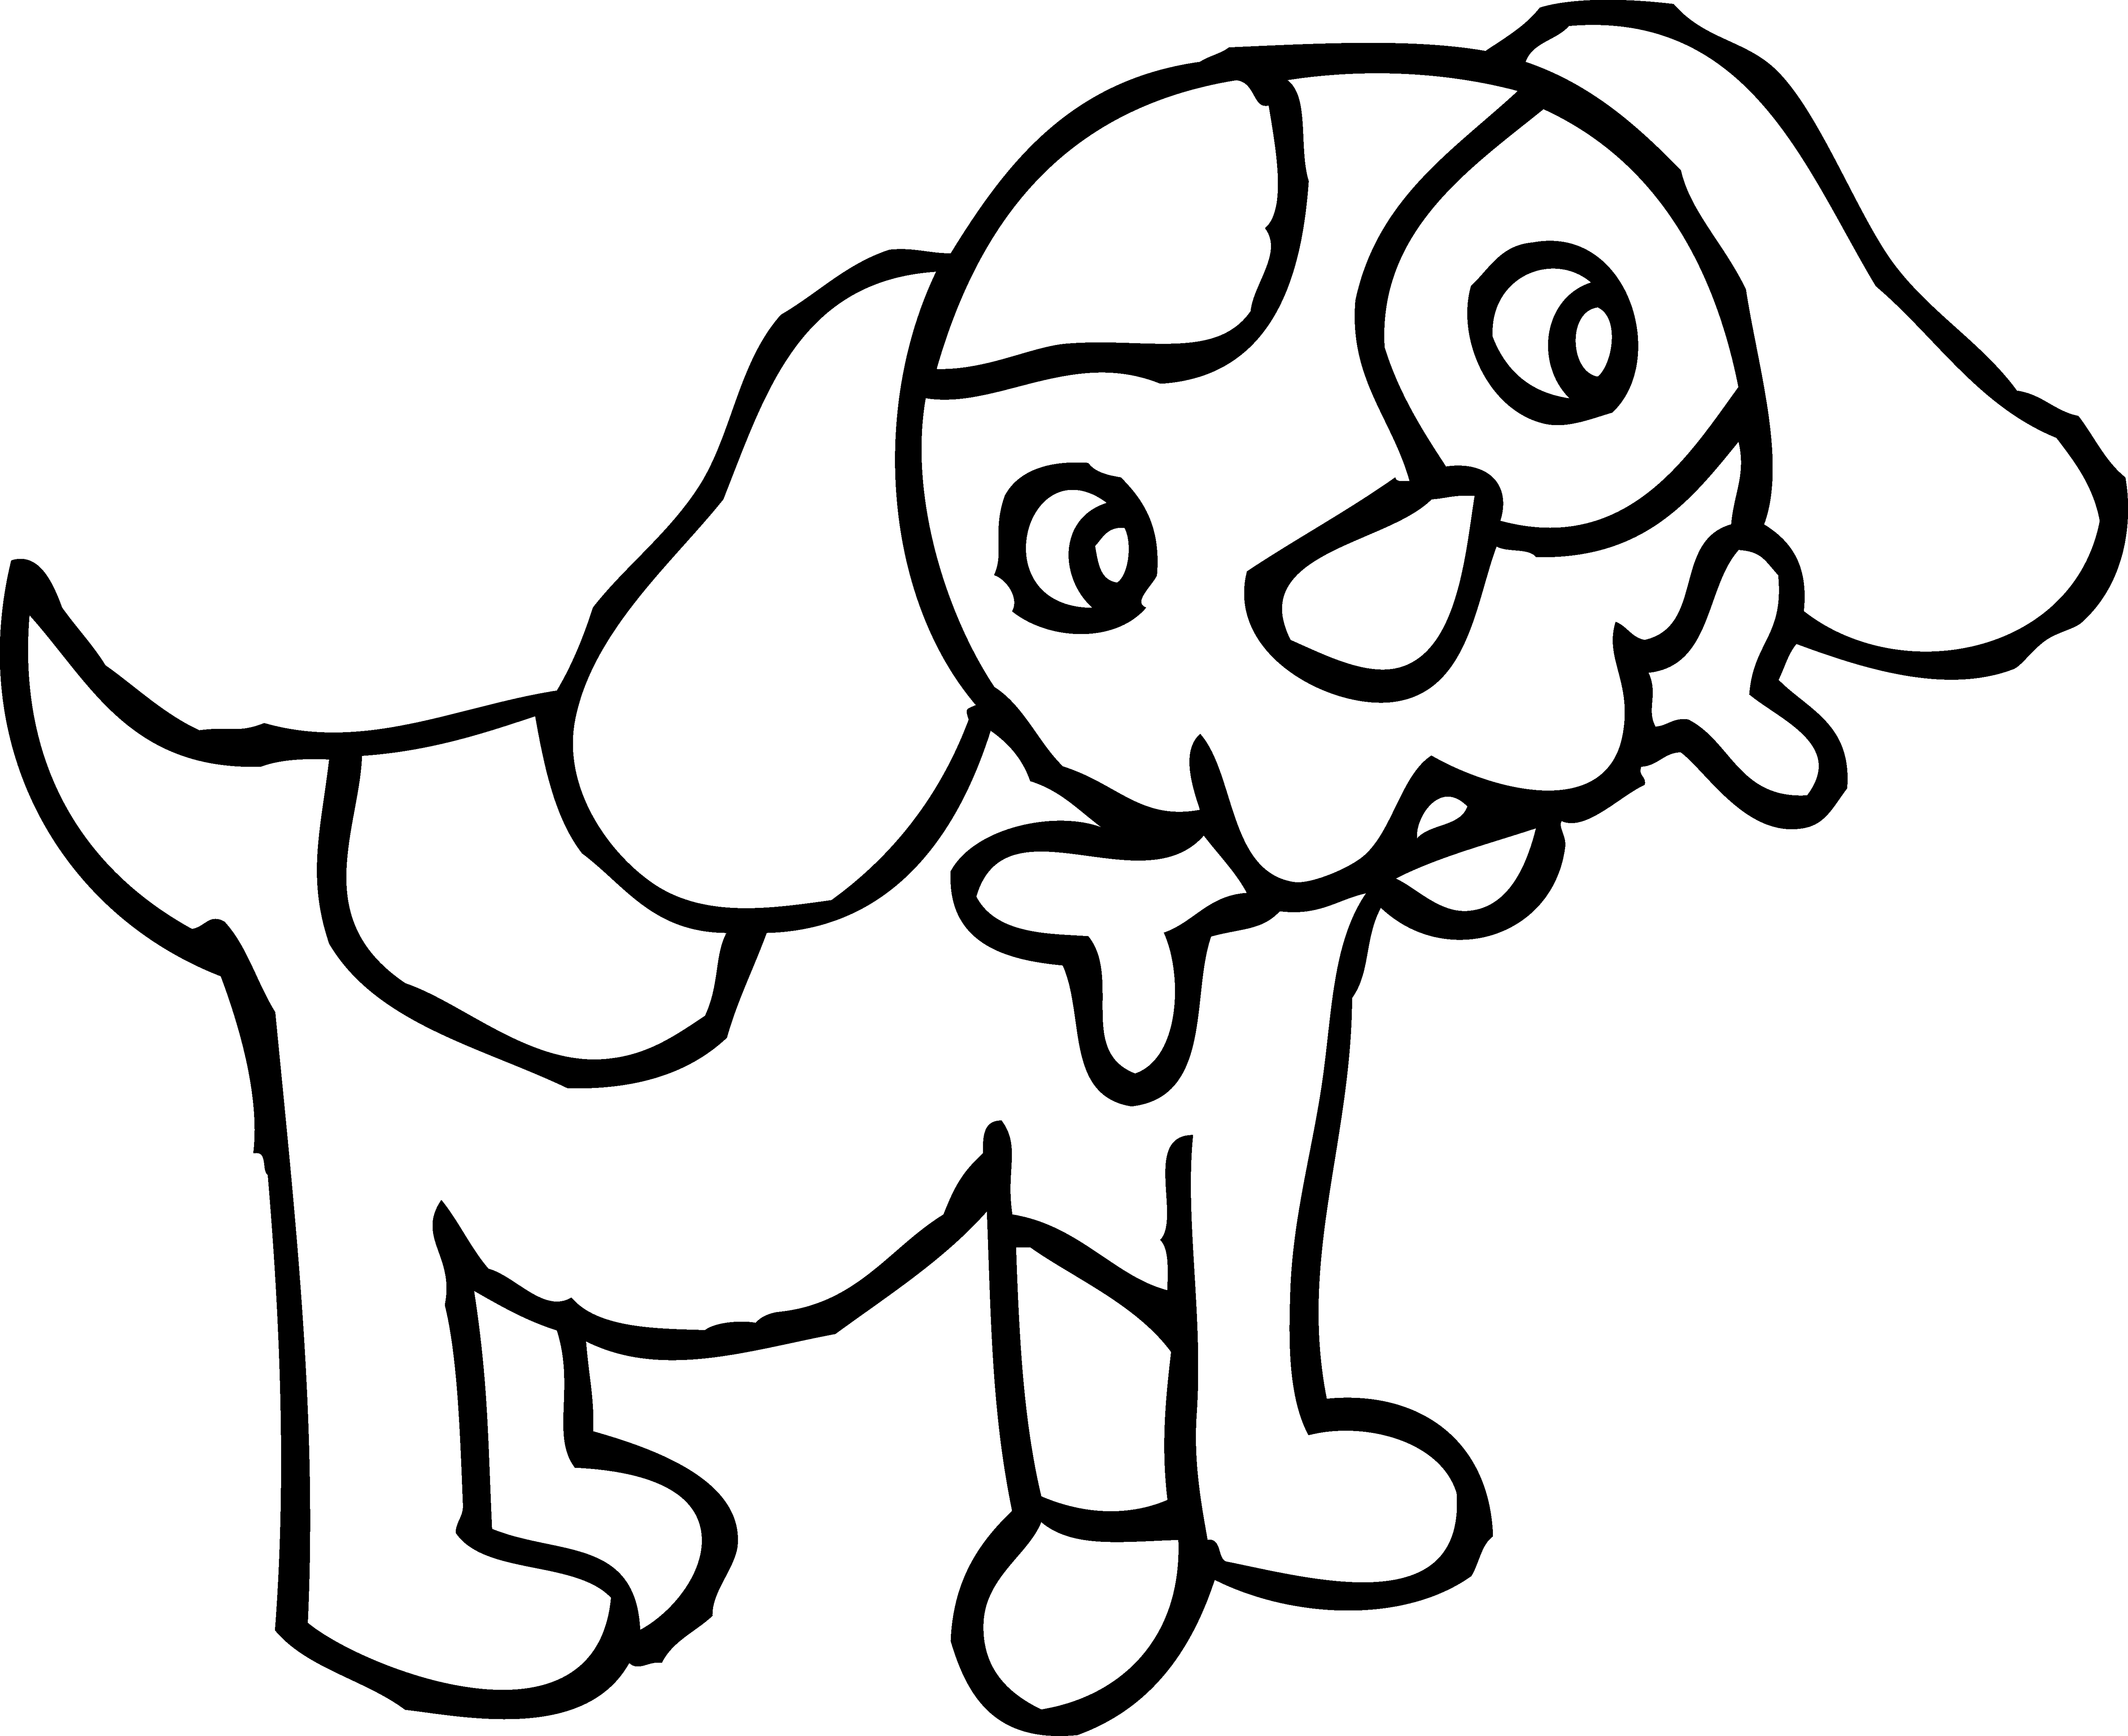 Dogs clipart black and white, Dogs black and white Transparent FREE for